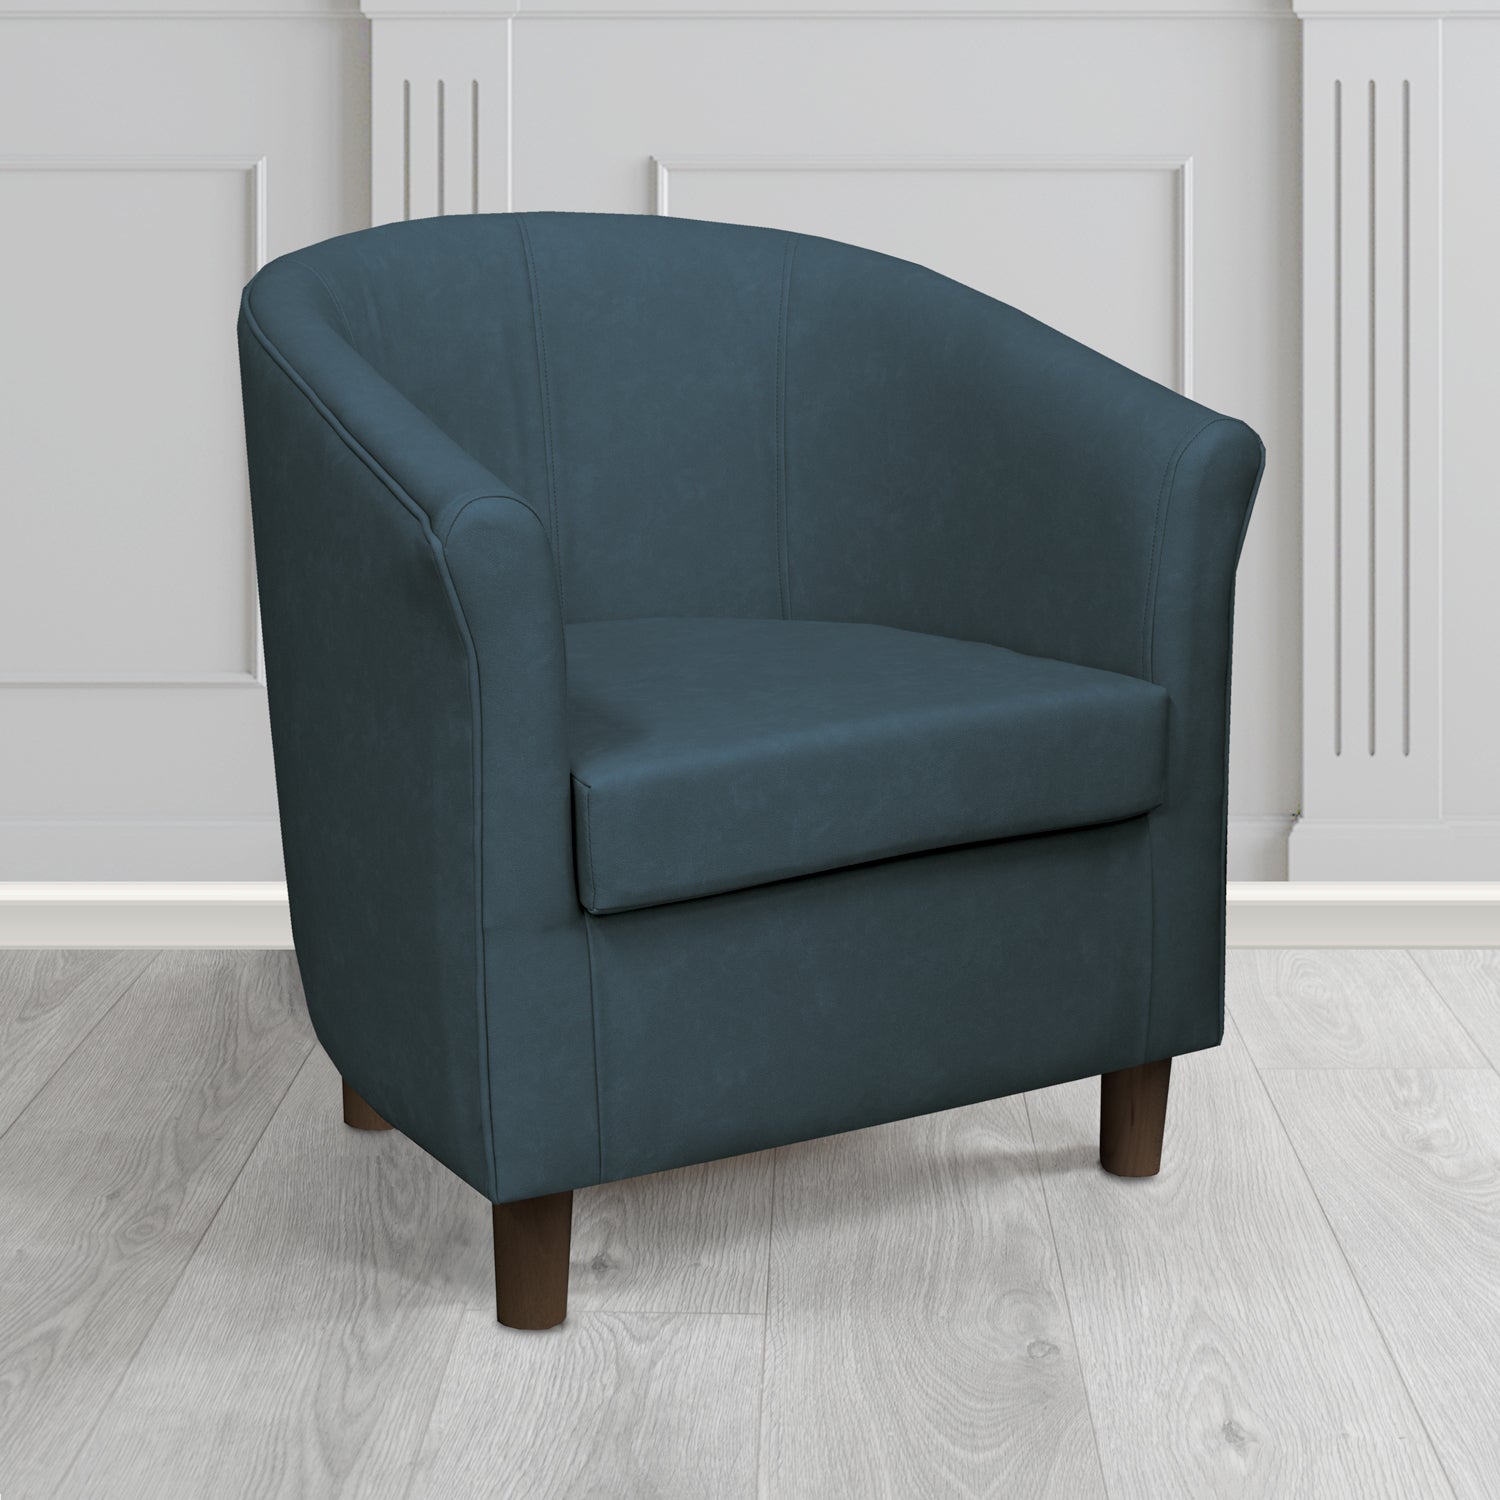 Tuscany Tub Chair in Infiniti Sapphire INF1855 Antimicrobial Crib 5 Faux Leather - The Tub Chair Shop